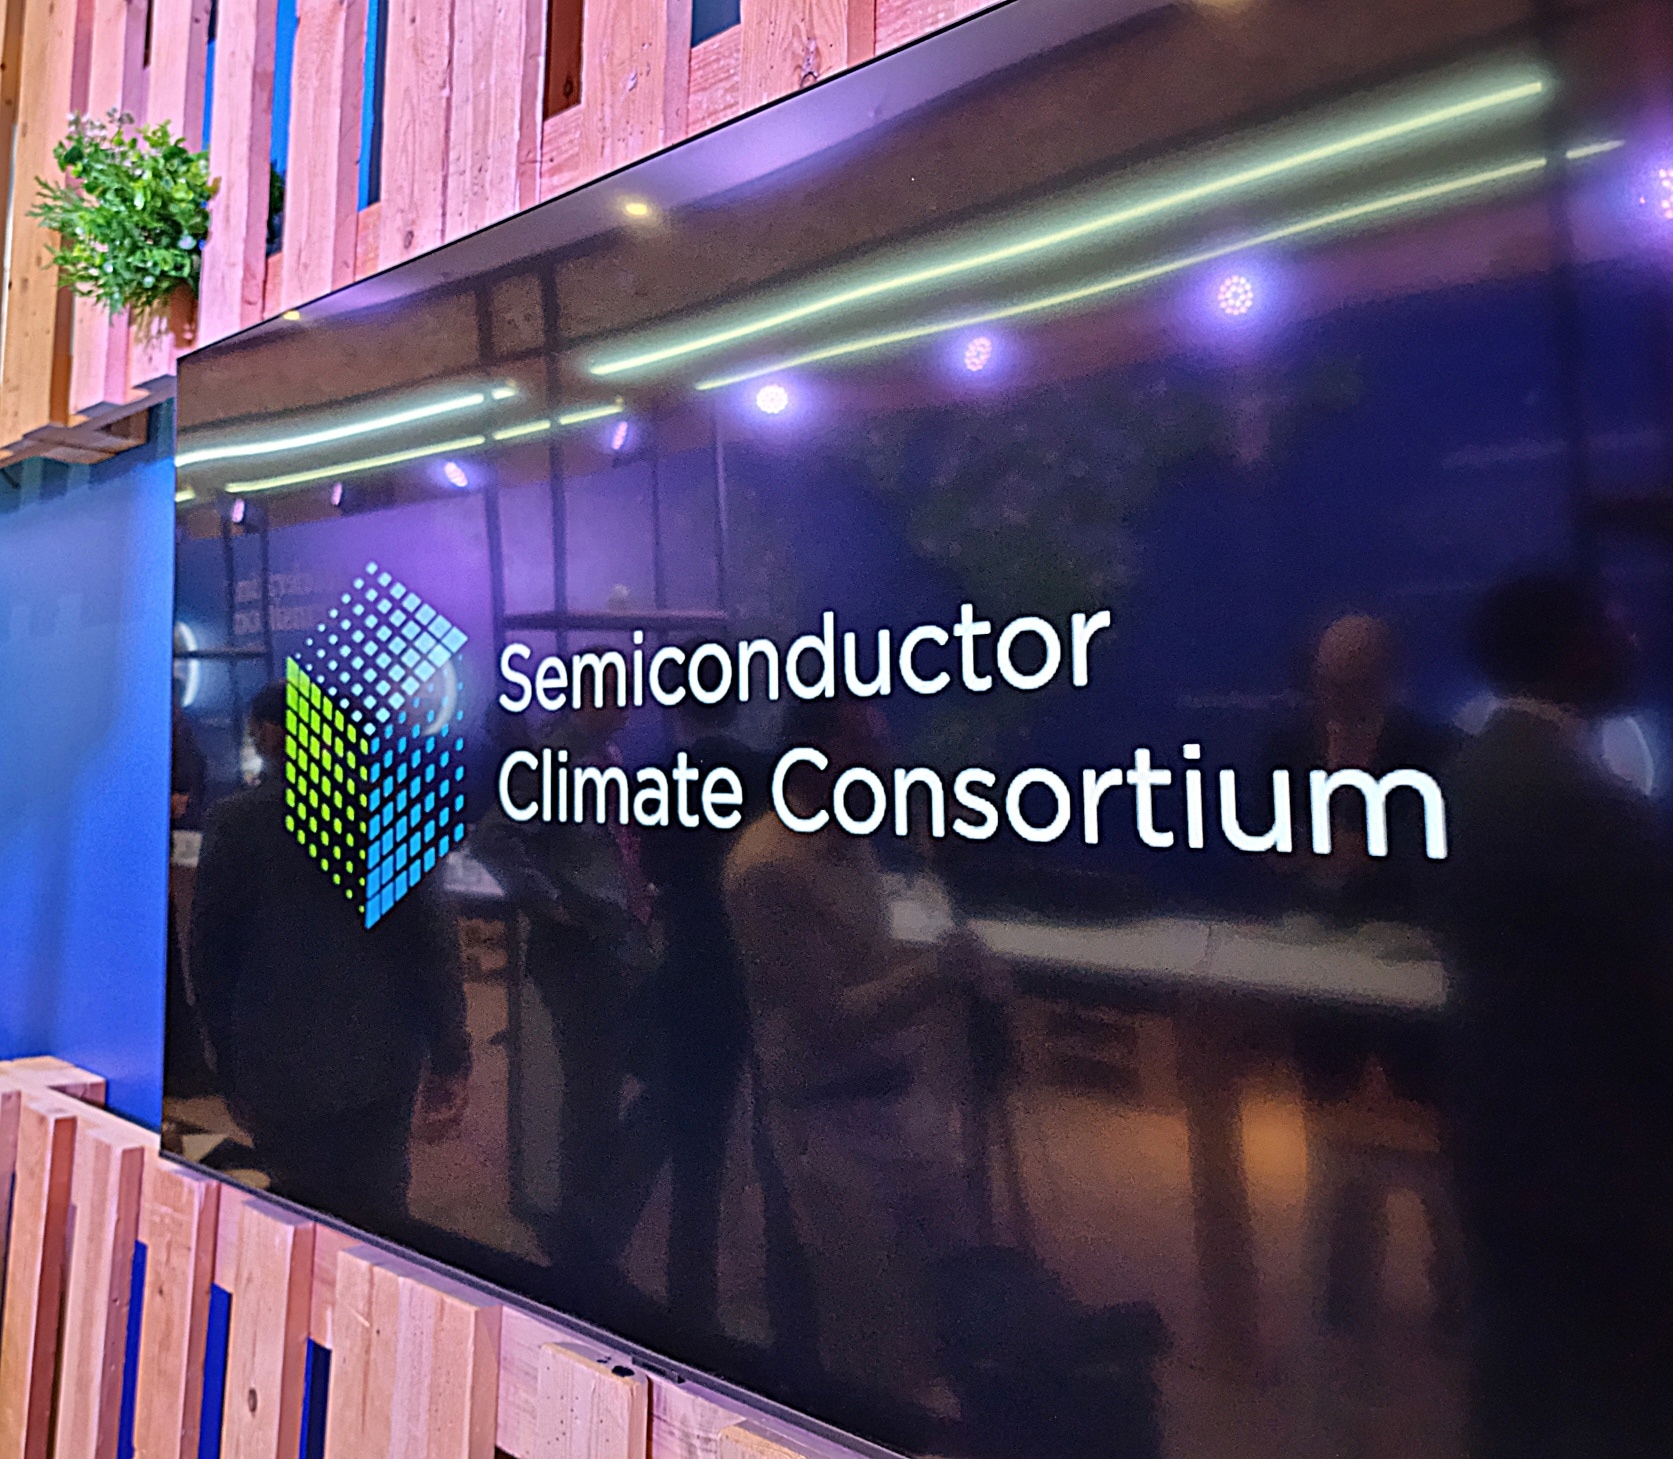 This is an image of a semiconductor climate consortium on a TV screen.